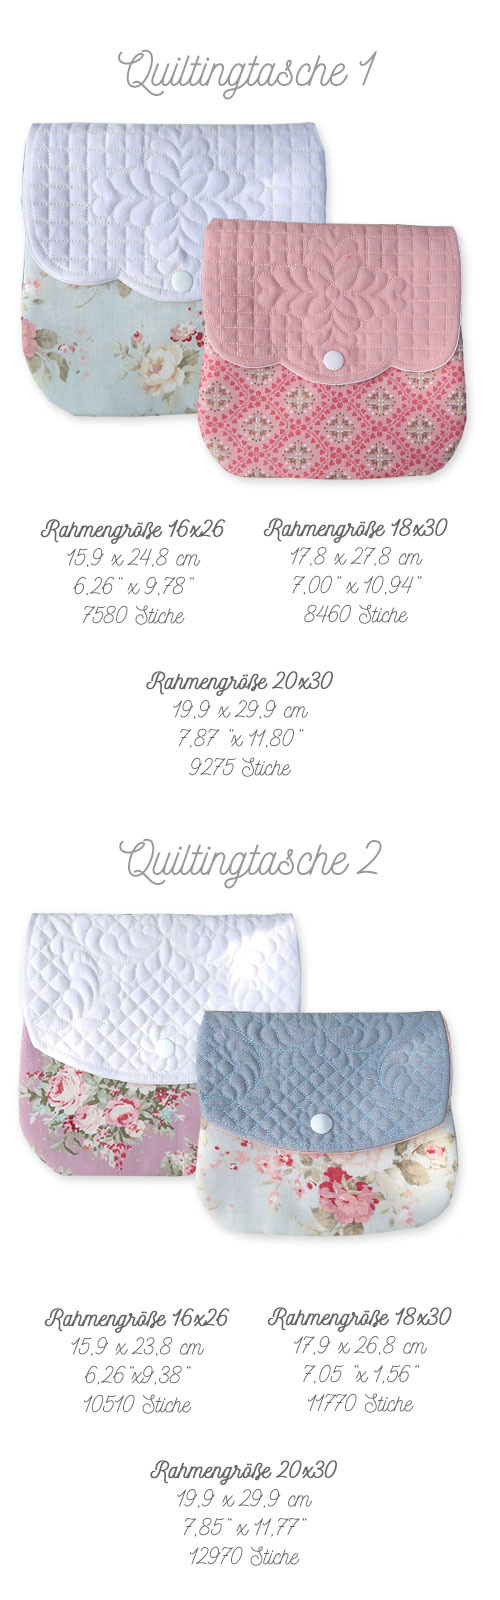 Quiltingbags ITH